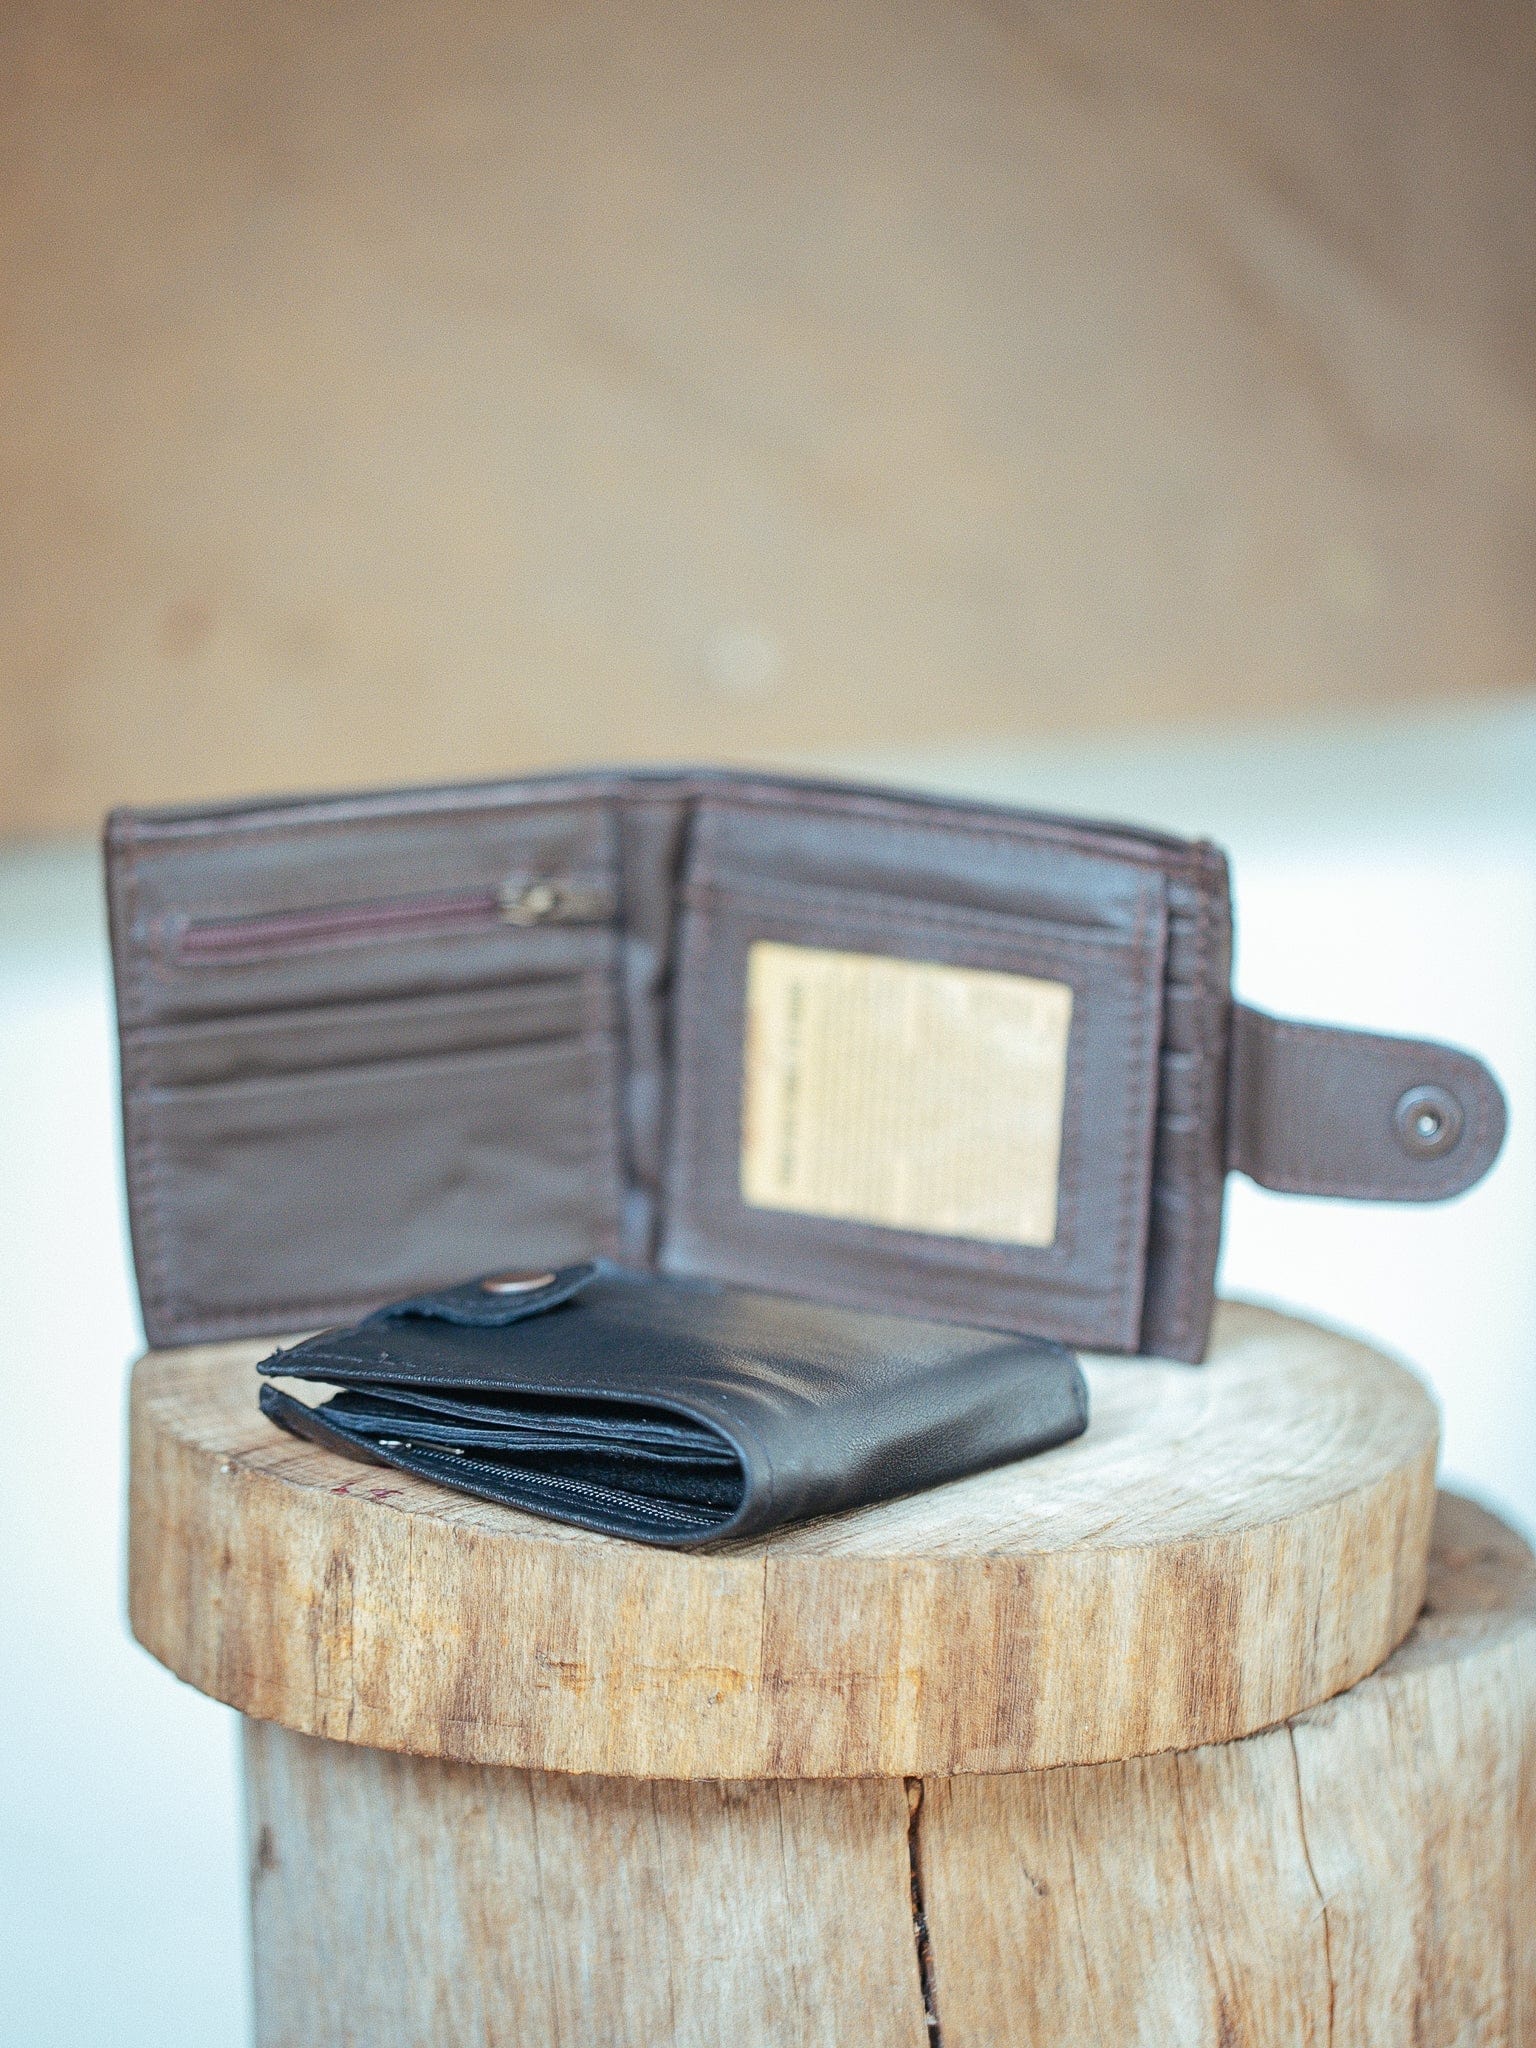 The Real McCaul Wallets Deluxe Men's Wallet-Cowhide Australian Made Australian Owned Leather Men's Wallet- Australian Made - Kangaroo & Cowhide